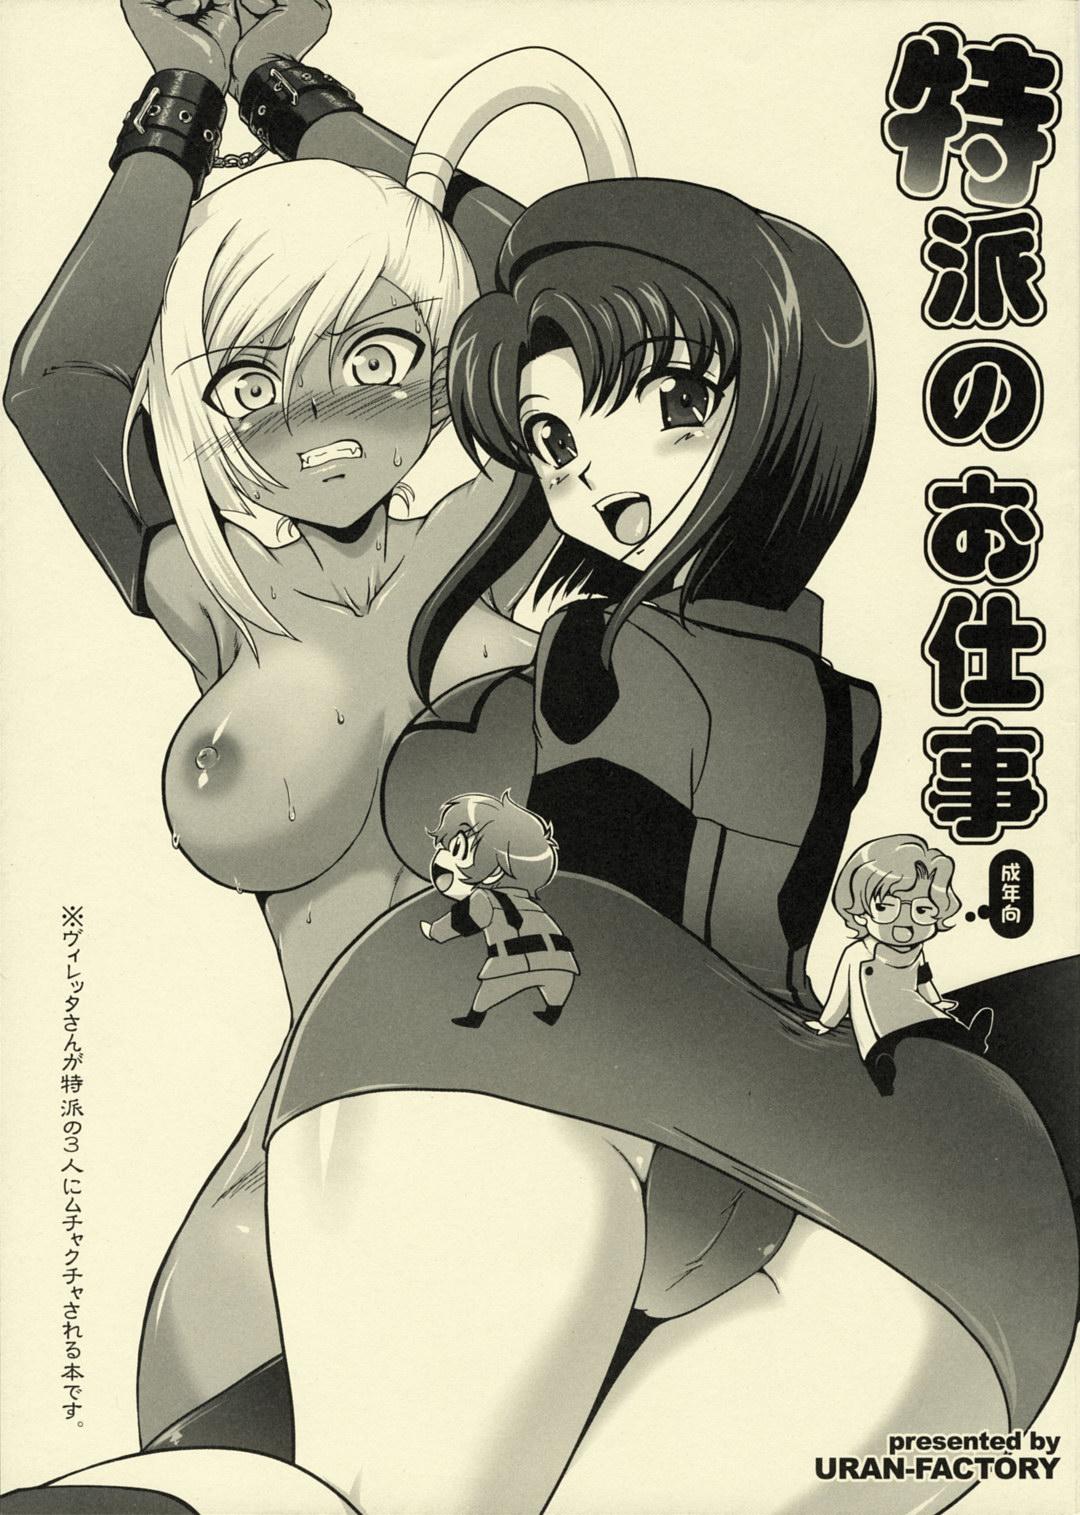 Prostitute Tokuha no Oshigoto | Special Envoy's Work - Code geass Alone - Picture 1